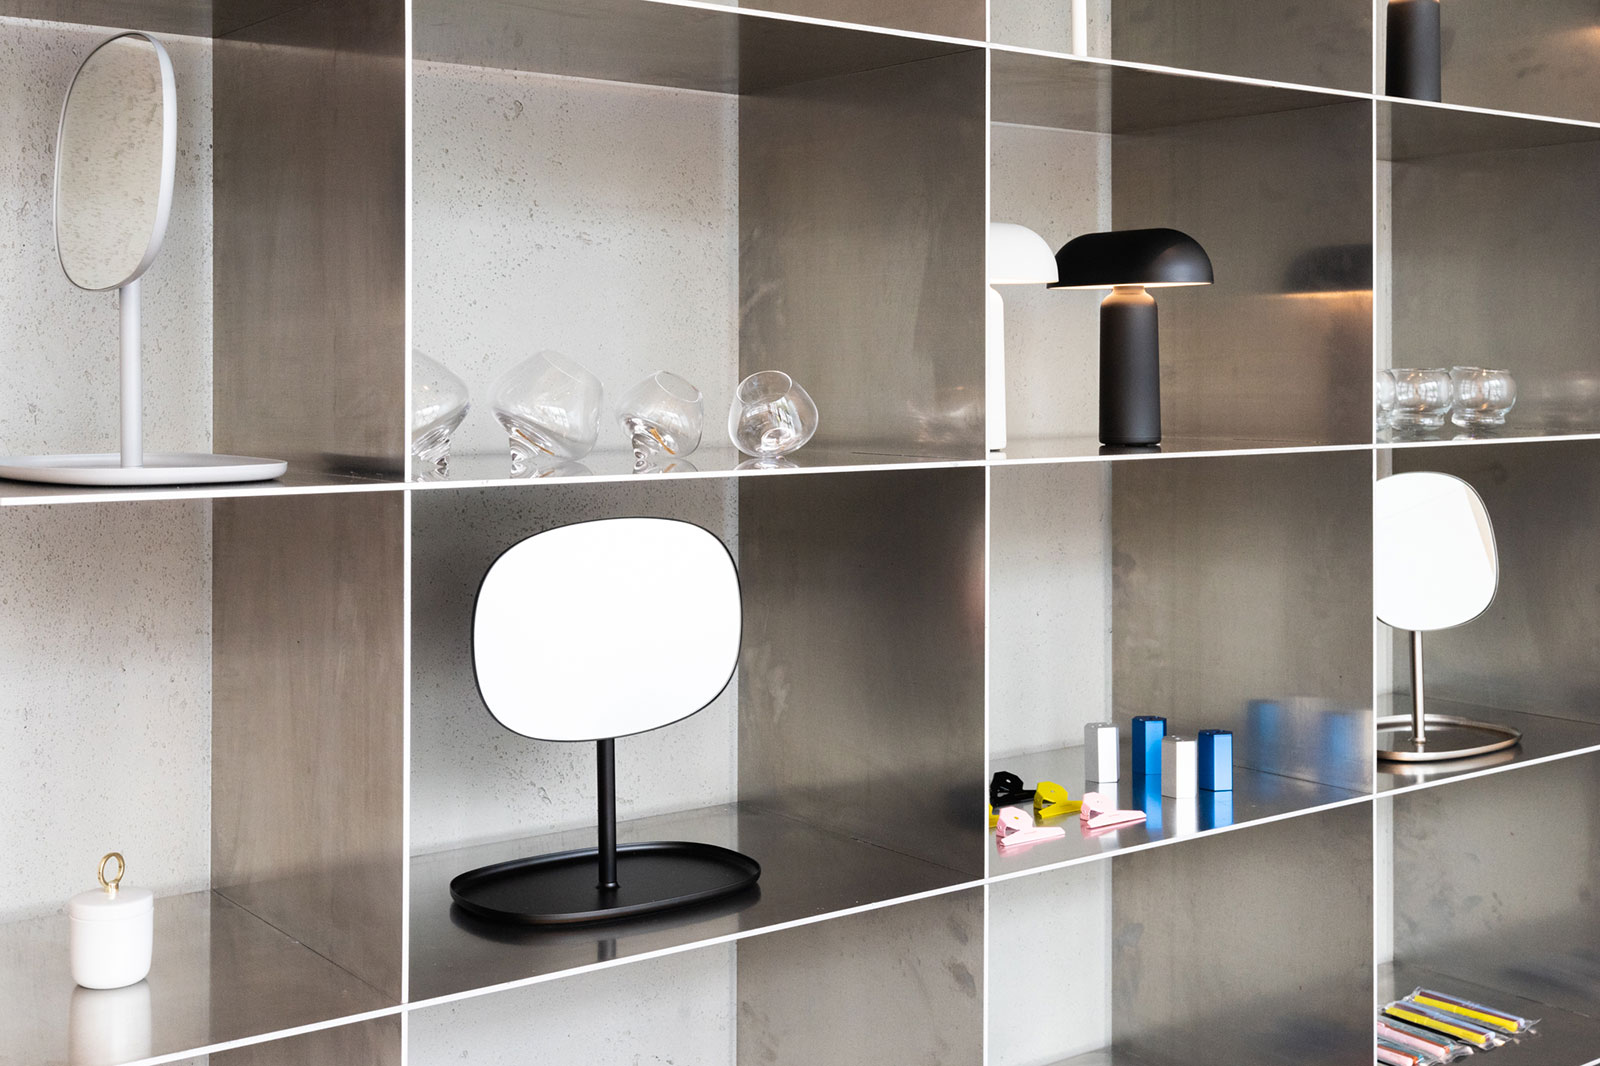 Steel shelves with Normann Copenhagen products